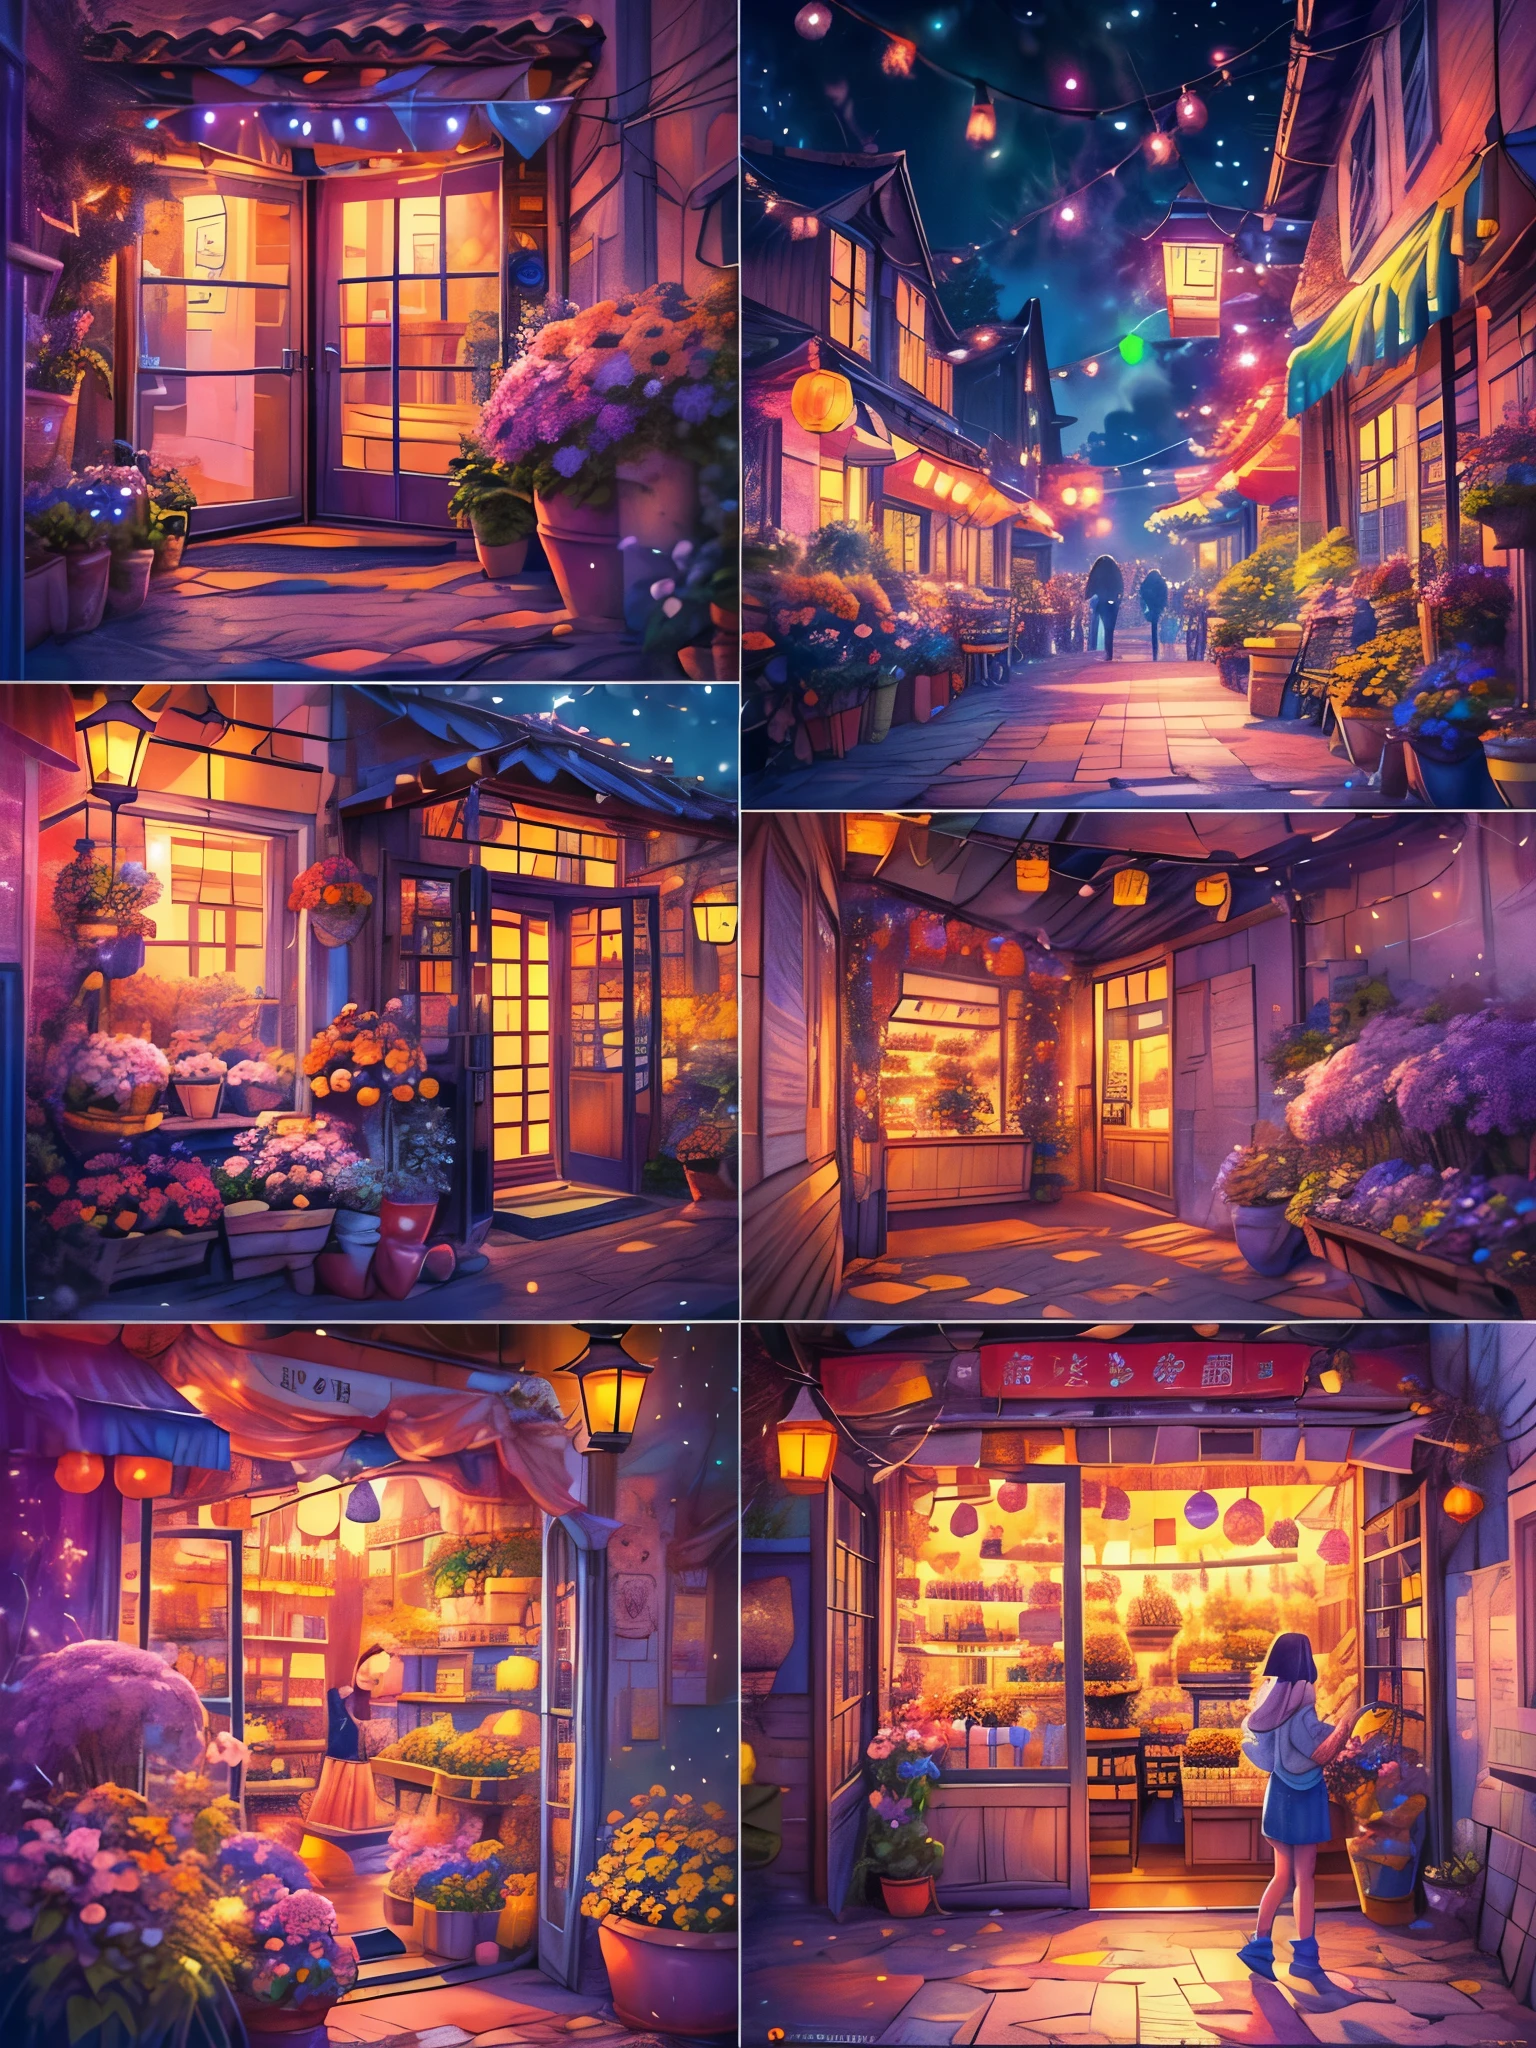 (Faraway view:1.8), ((at winter season))，(New Year&#39;s Day)，((fireworks in the night sky:1.7))，((Fireworks bloom，lots of fireworks))，Quaint European village，(corner flower shop:1.5)，beautiful  flowers，warmly lit，(Filled with many colorful lanterns and New Year decorations:1.8)，(Girl in down jacket standing on charming cobblestone street:1.2), Bathed in the warm glow of street lights，(Vines decorated with bright flowers climb up rustic buildings), Create scenes with natural beauty，The air is filled with the scent of fresh flowers from a nearby flower shop，(Depicted in delicate vector illustration style and flat style)，HighestQuali，8k，A high resolution，tmasterpiece：1.2，ultra - detailed，high dynamic range imaging，hyper HD，Studio lighting，hyperdetailed painting，Sharp focus，physically-based renderingt，Extremely detailed description，professinal，vivd colour，styled：Vector illustration